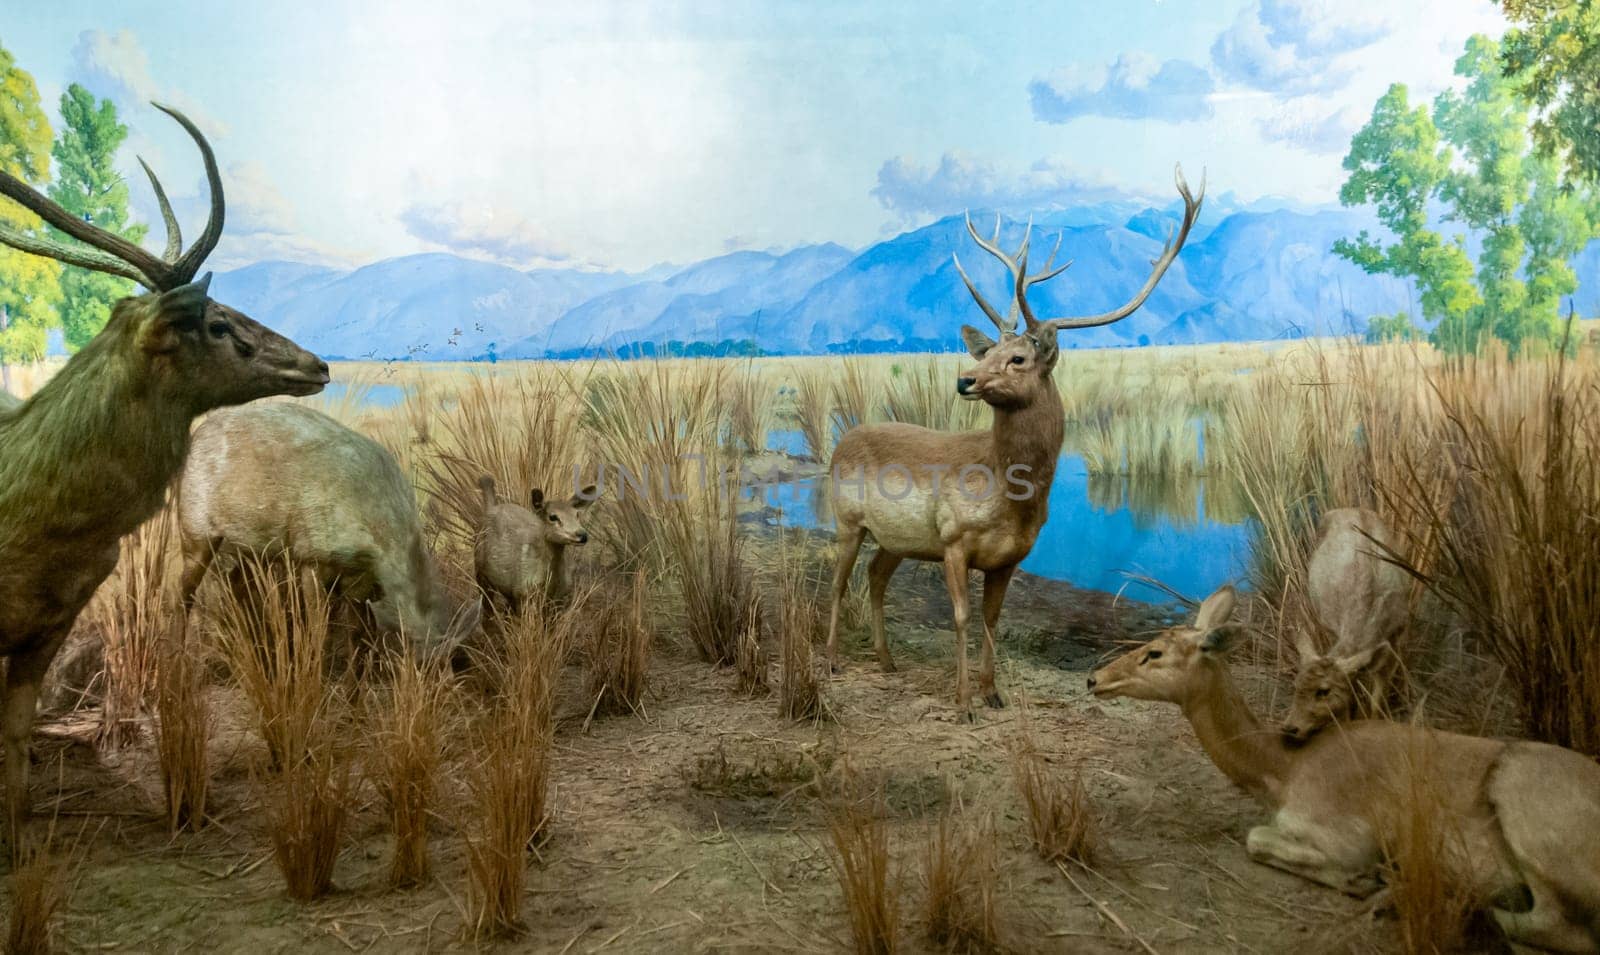 NEW YORK, USA - DECEMBER 05, 2011: Stuffed deer with antlers on display at the Museum of National History, USA